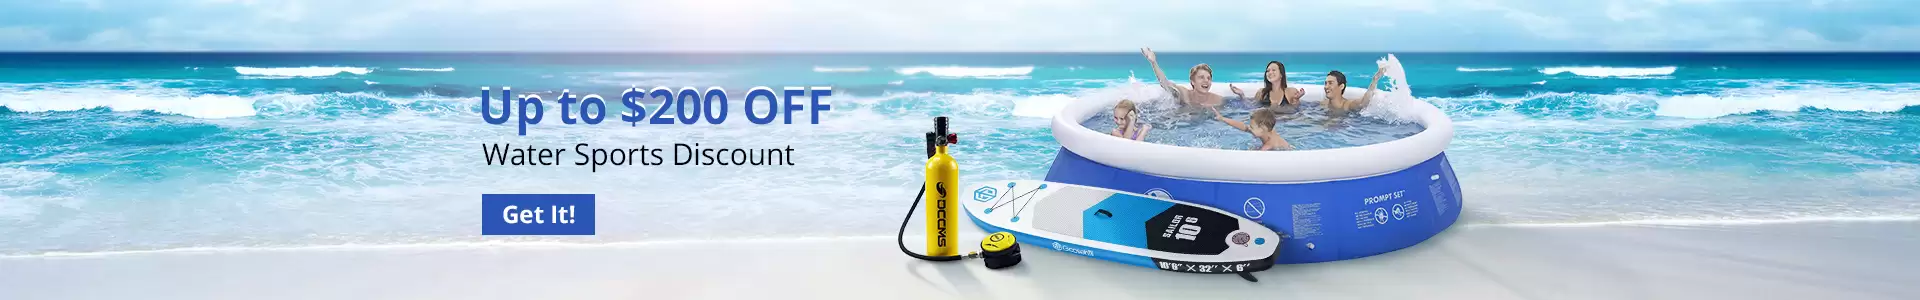 Get 20% Off For Water Sport Promotion Discount Up To $200 With This Coupon At Banggood